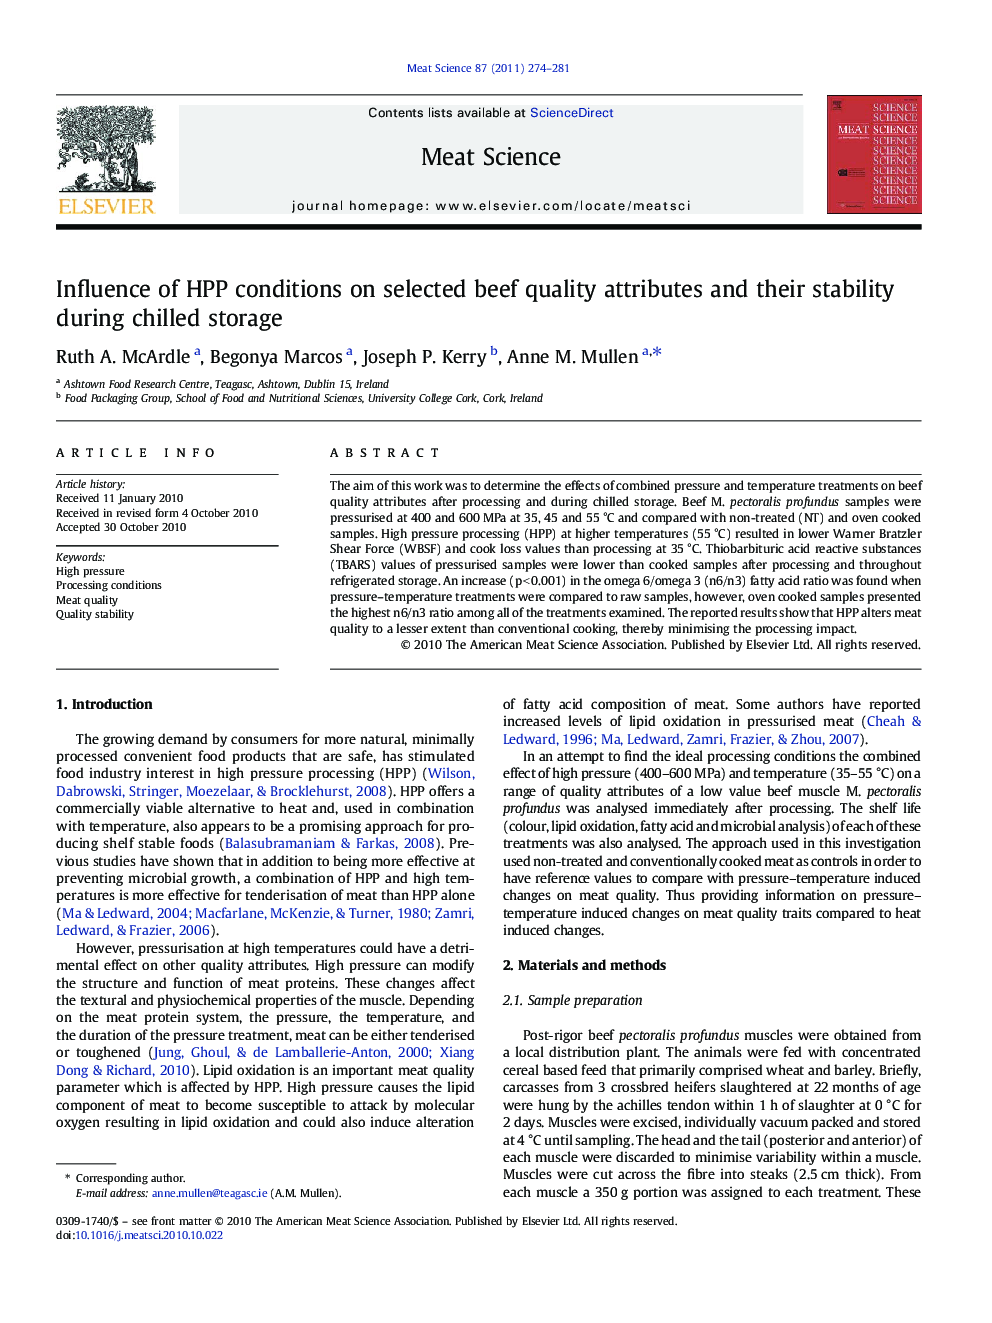 Influence of HPP conditions on selected beef quality attributes and their stability during chilled storage